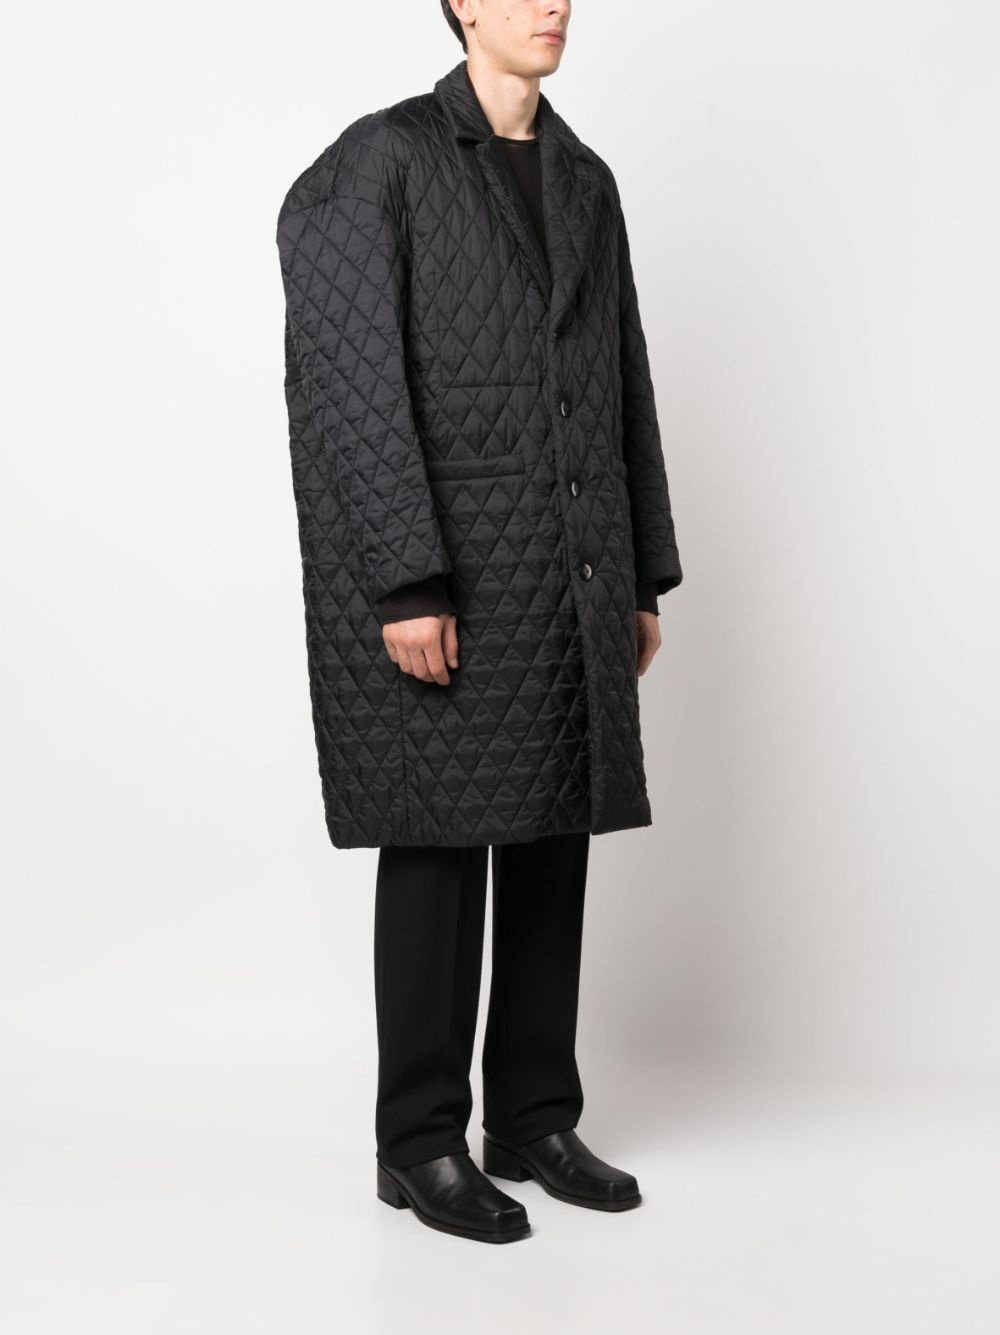 diamond-quilted single-breasted coat - 3